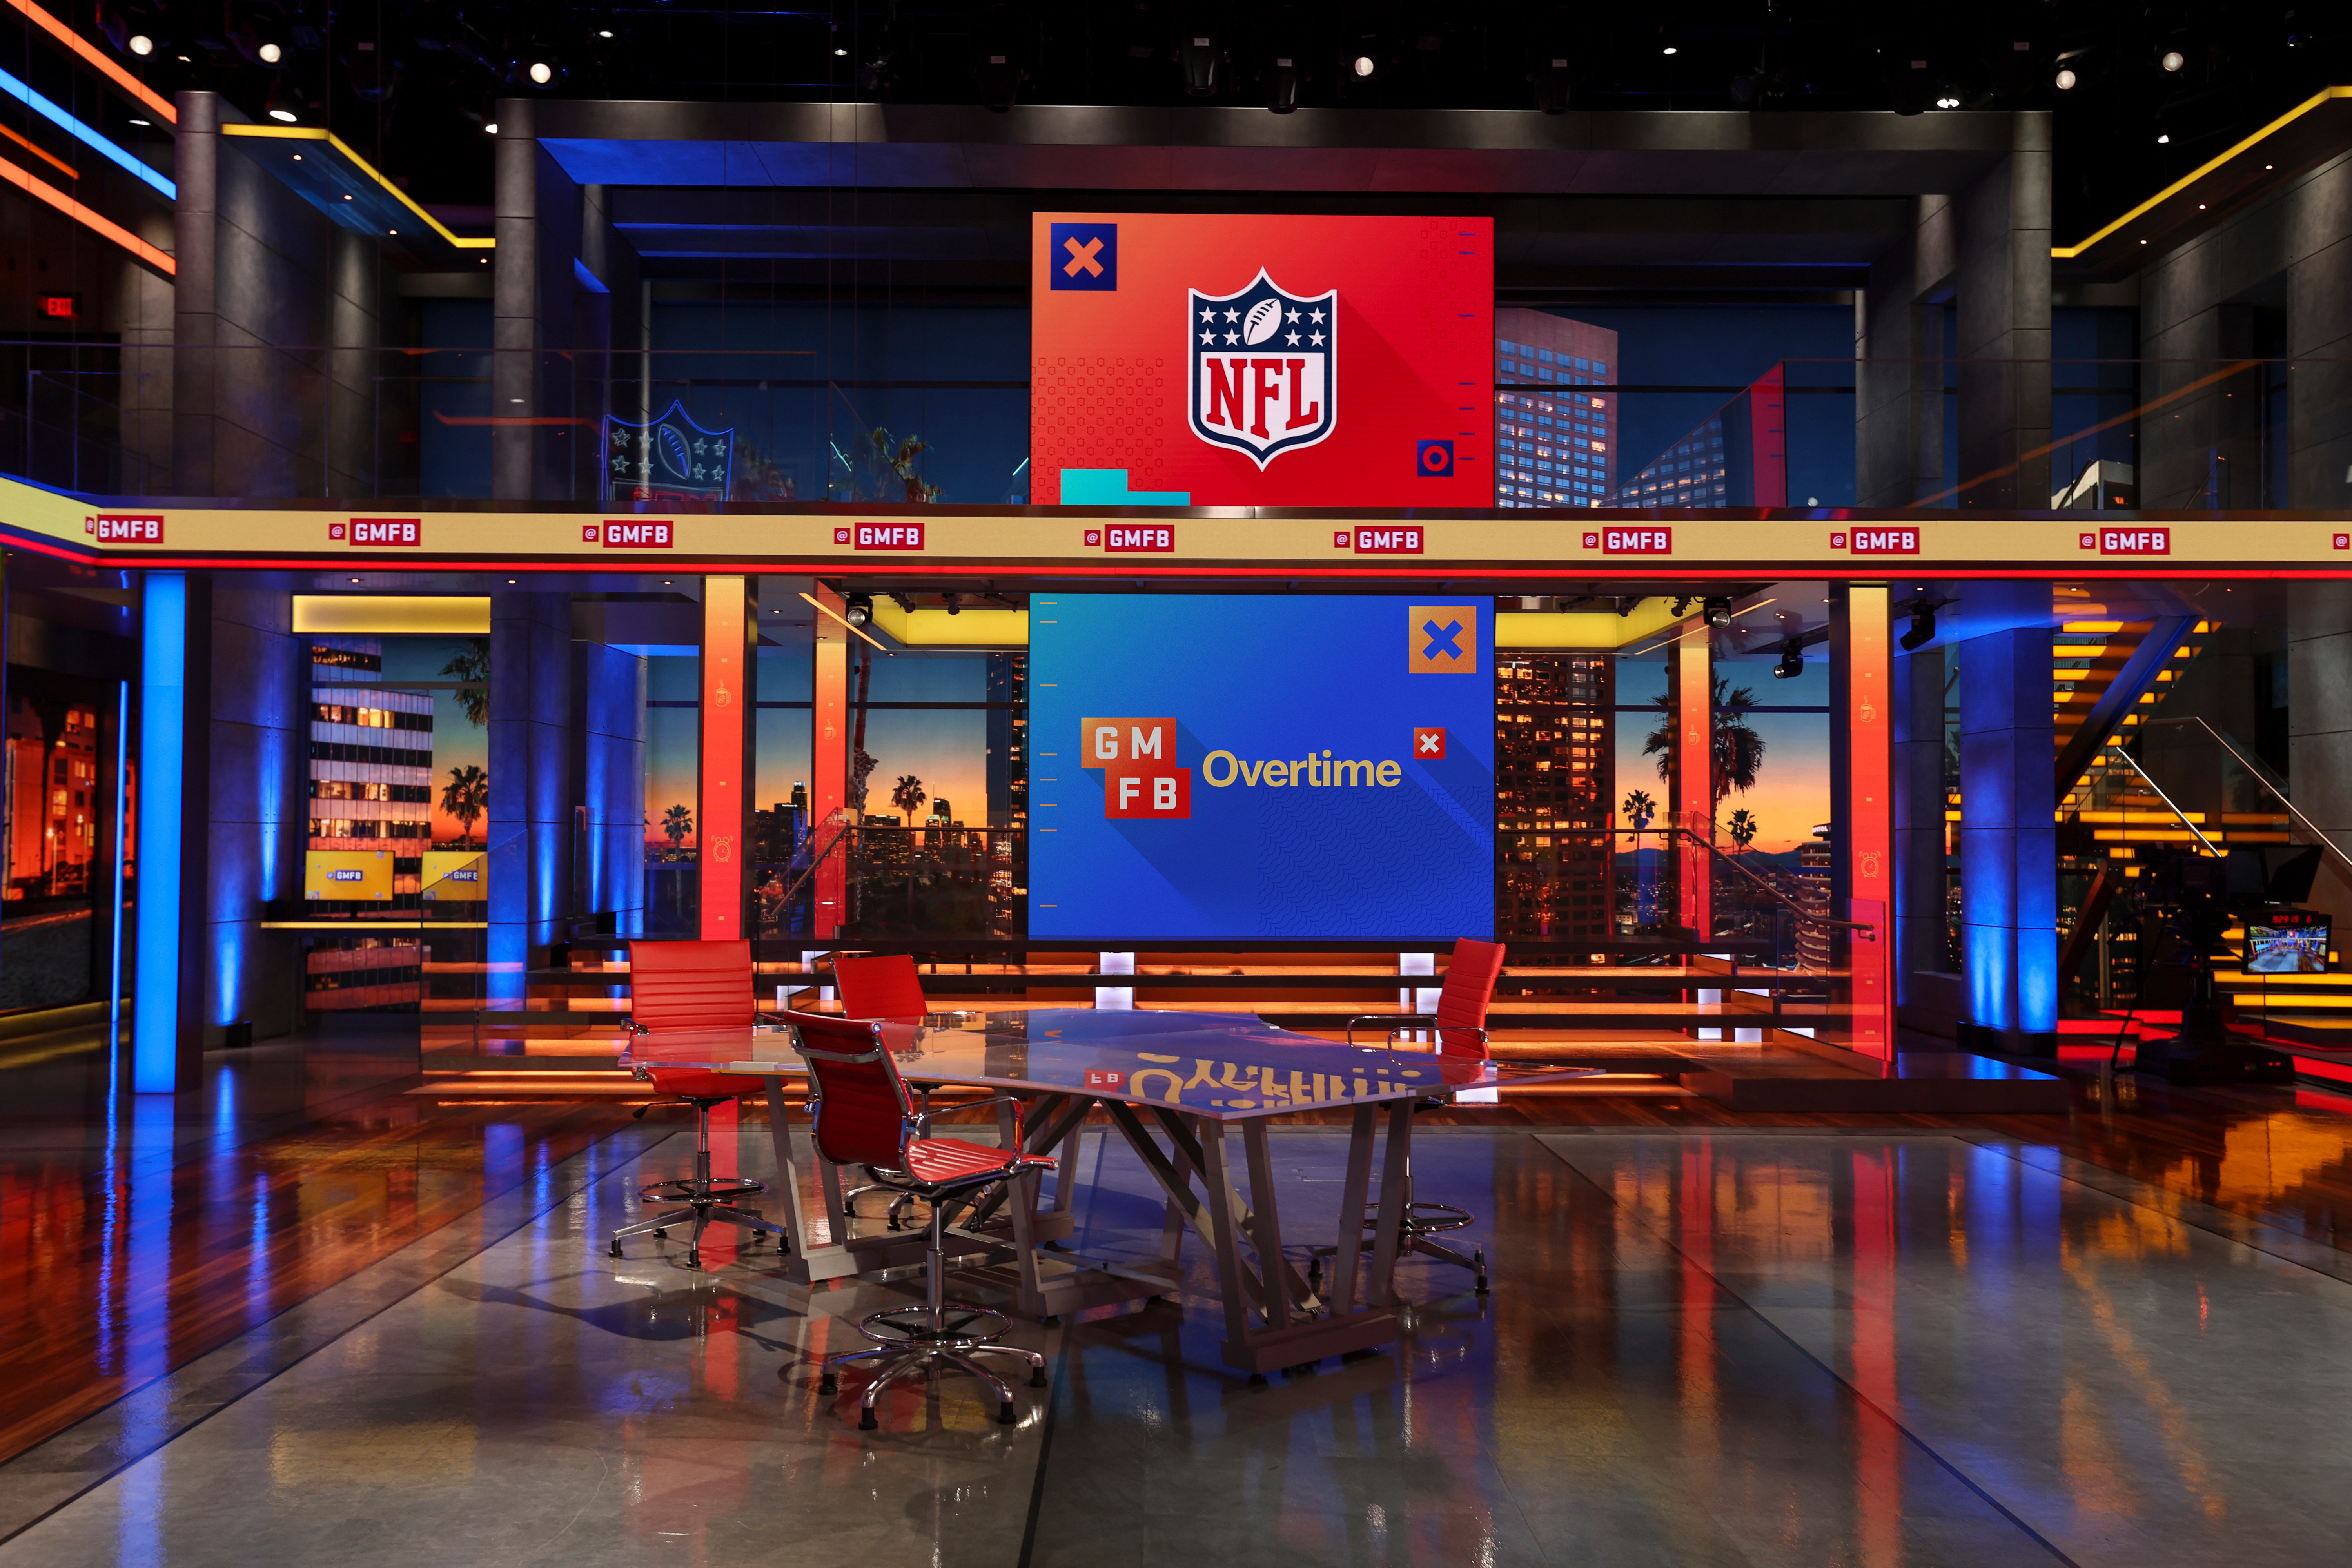 Roku Picks Up ‘Good Morning Football’ as NFL Readies Relaunch of Show